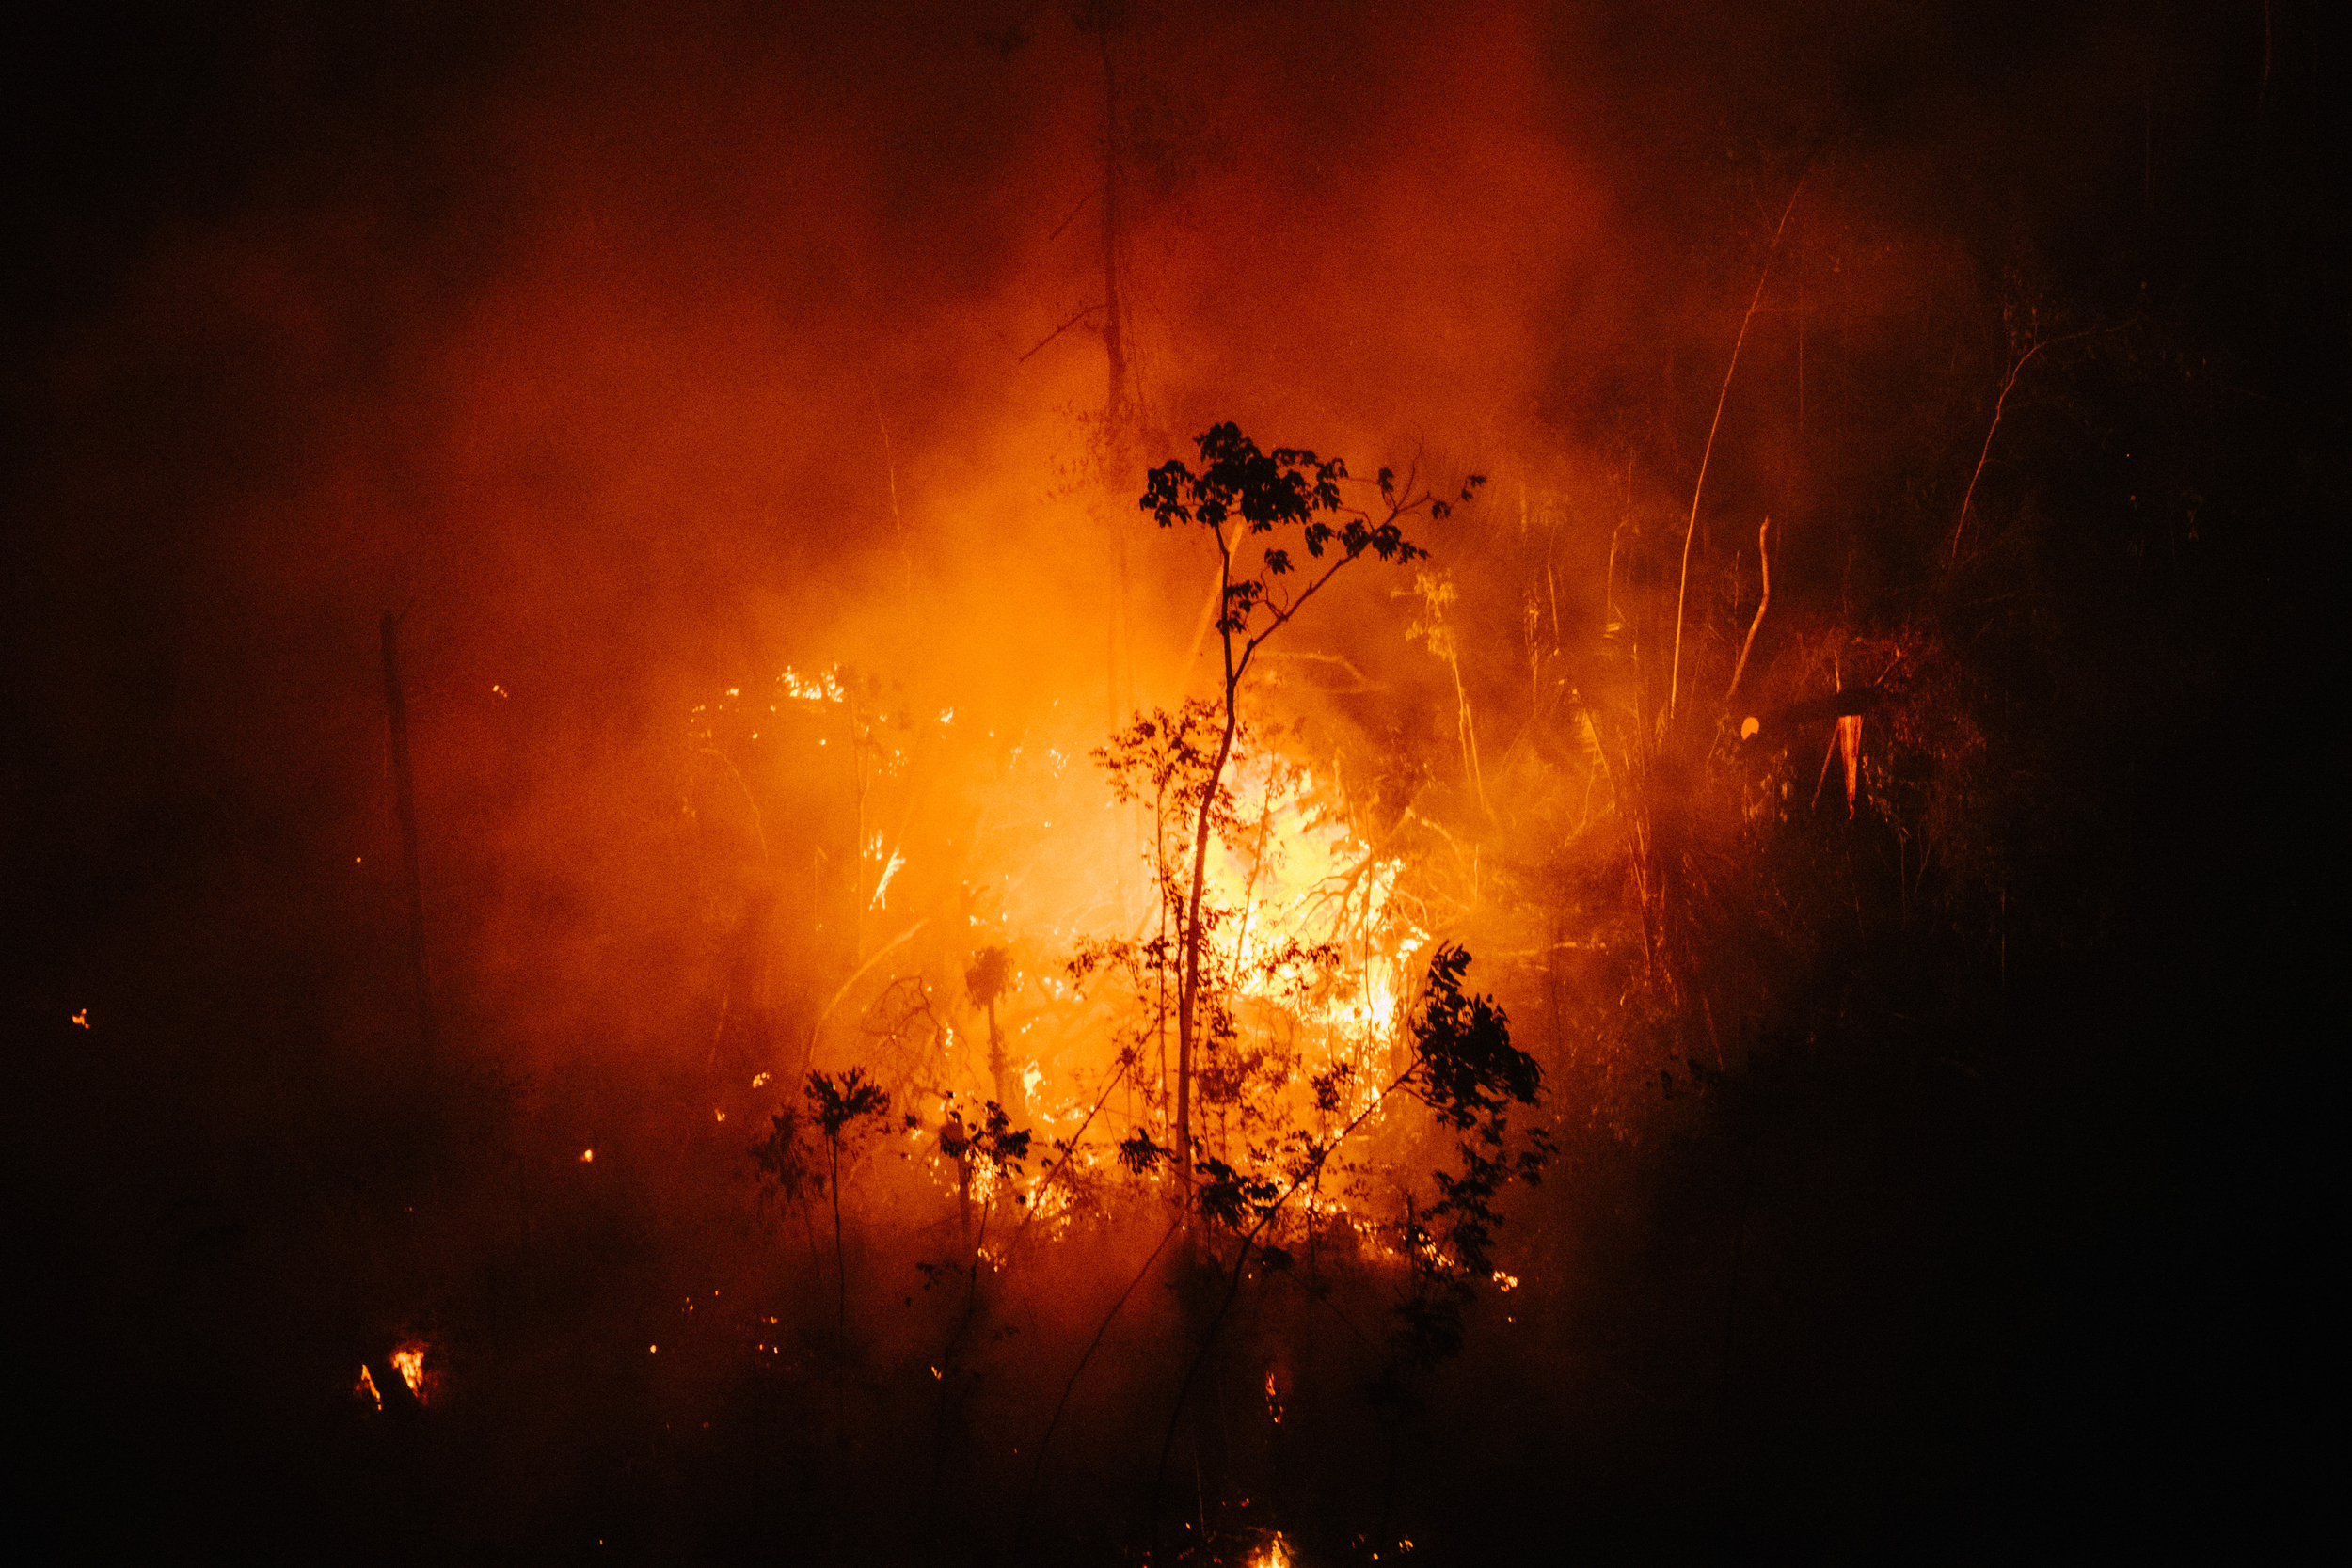 A close up of fire burning with the silhouettes of tree twigs, with a deep black border around the brightness of the orange and yellow fire glow